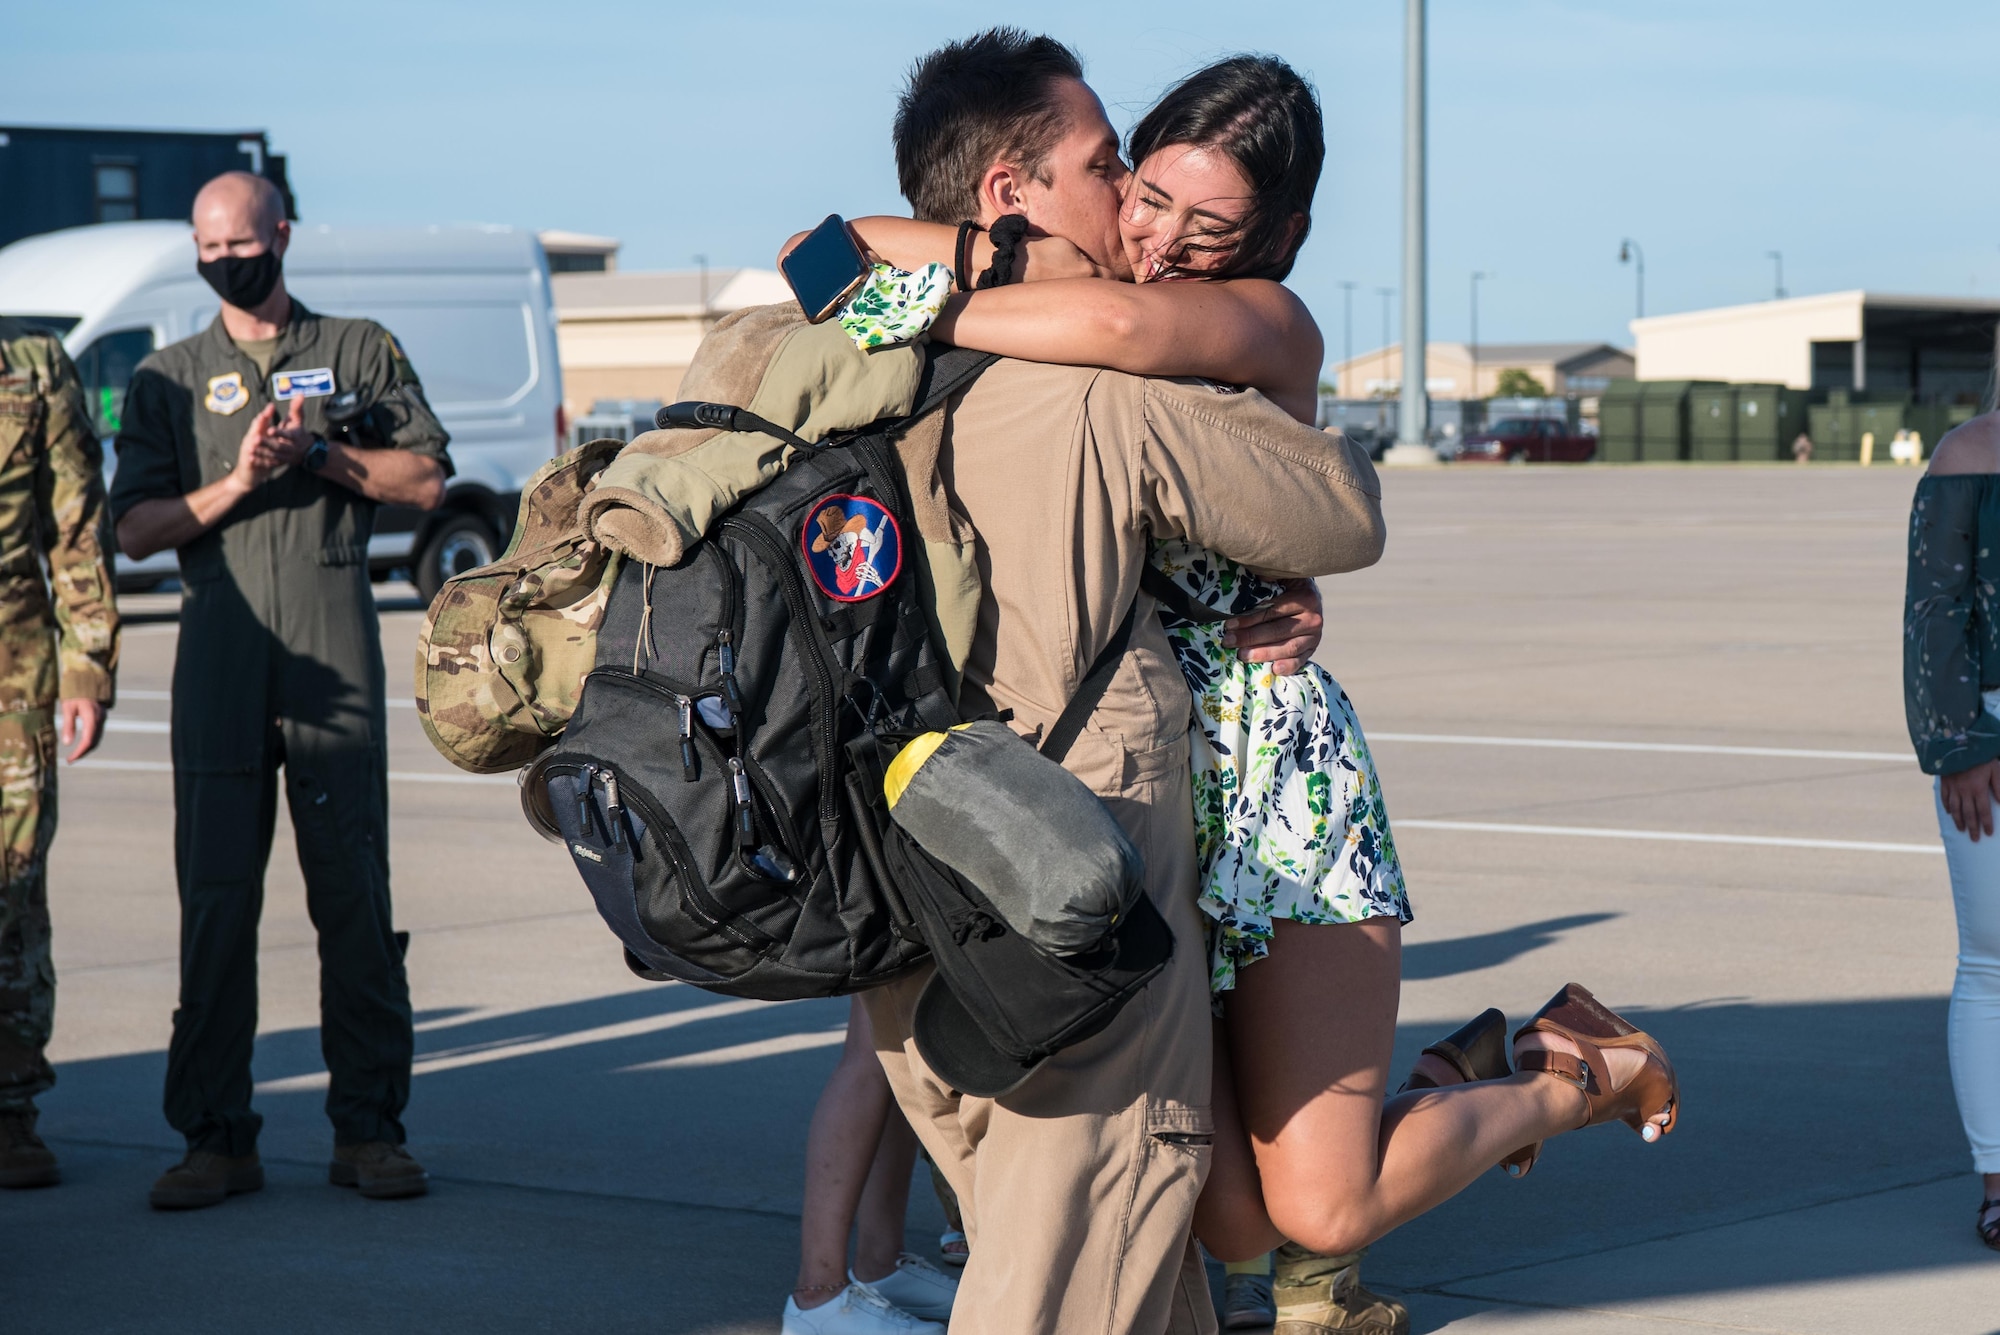 Capt. Collin Tuthill, 349th Air Refueling Squadron pilot, hugs his girlfriend, Erika Black, after returning home from a deployment to Southwest Asia, Aug. 20, 2020, at McConnell Air Force Base, Kansas. Tuthill and the rest of the team delivered more than 38 million pounds of fuel to 16 different airframes during the deployment. (U.S. Air Force photo by Senior Airman Alexi Bosarge)